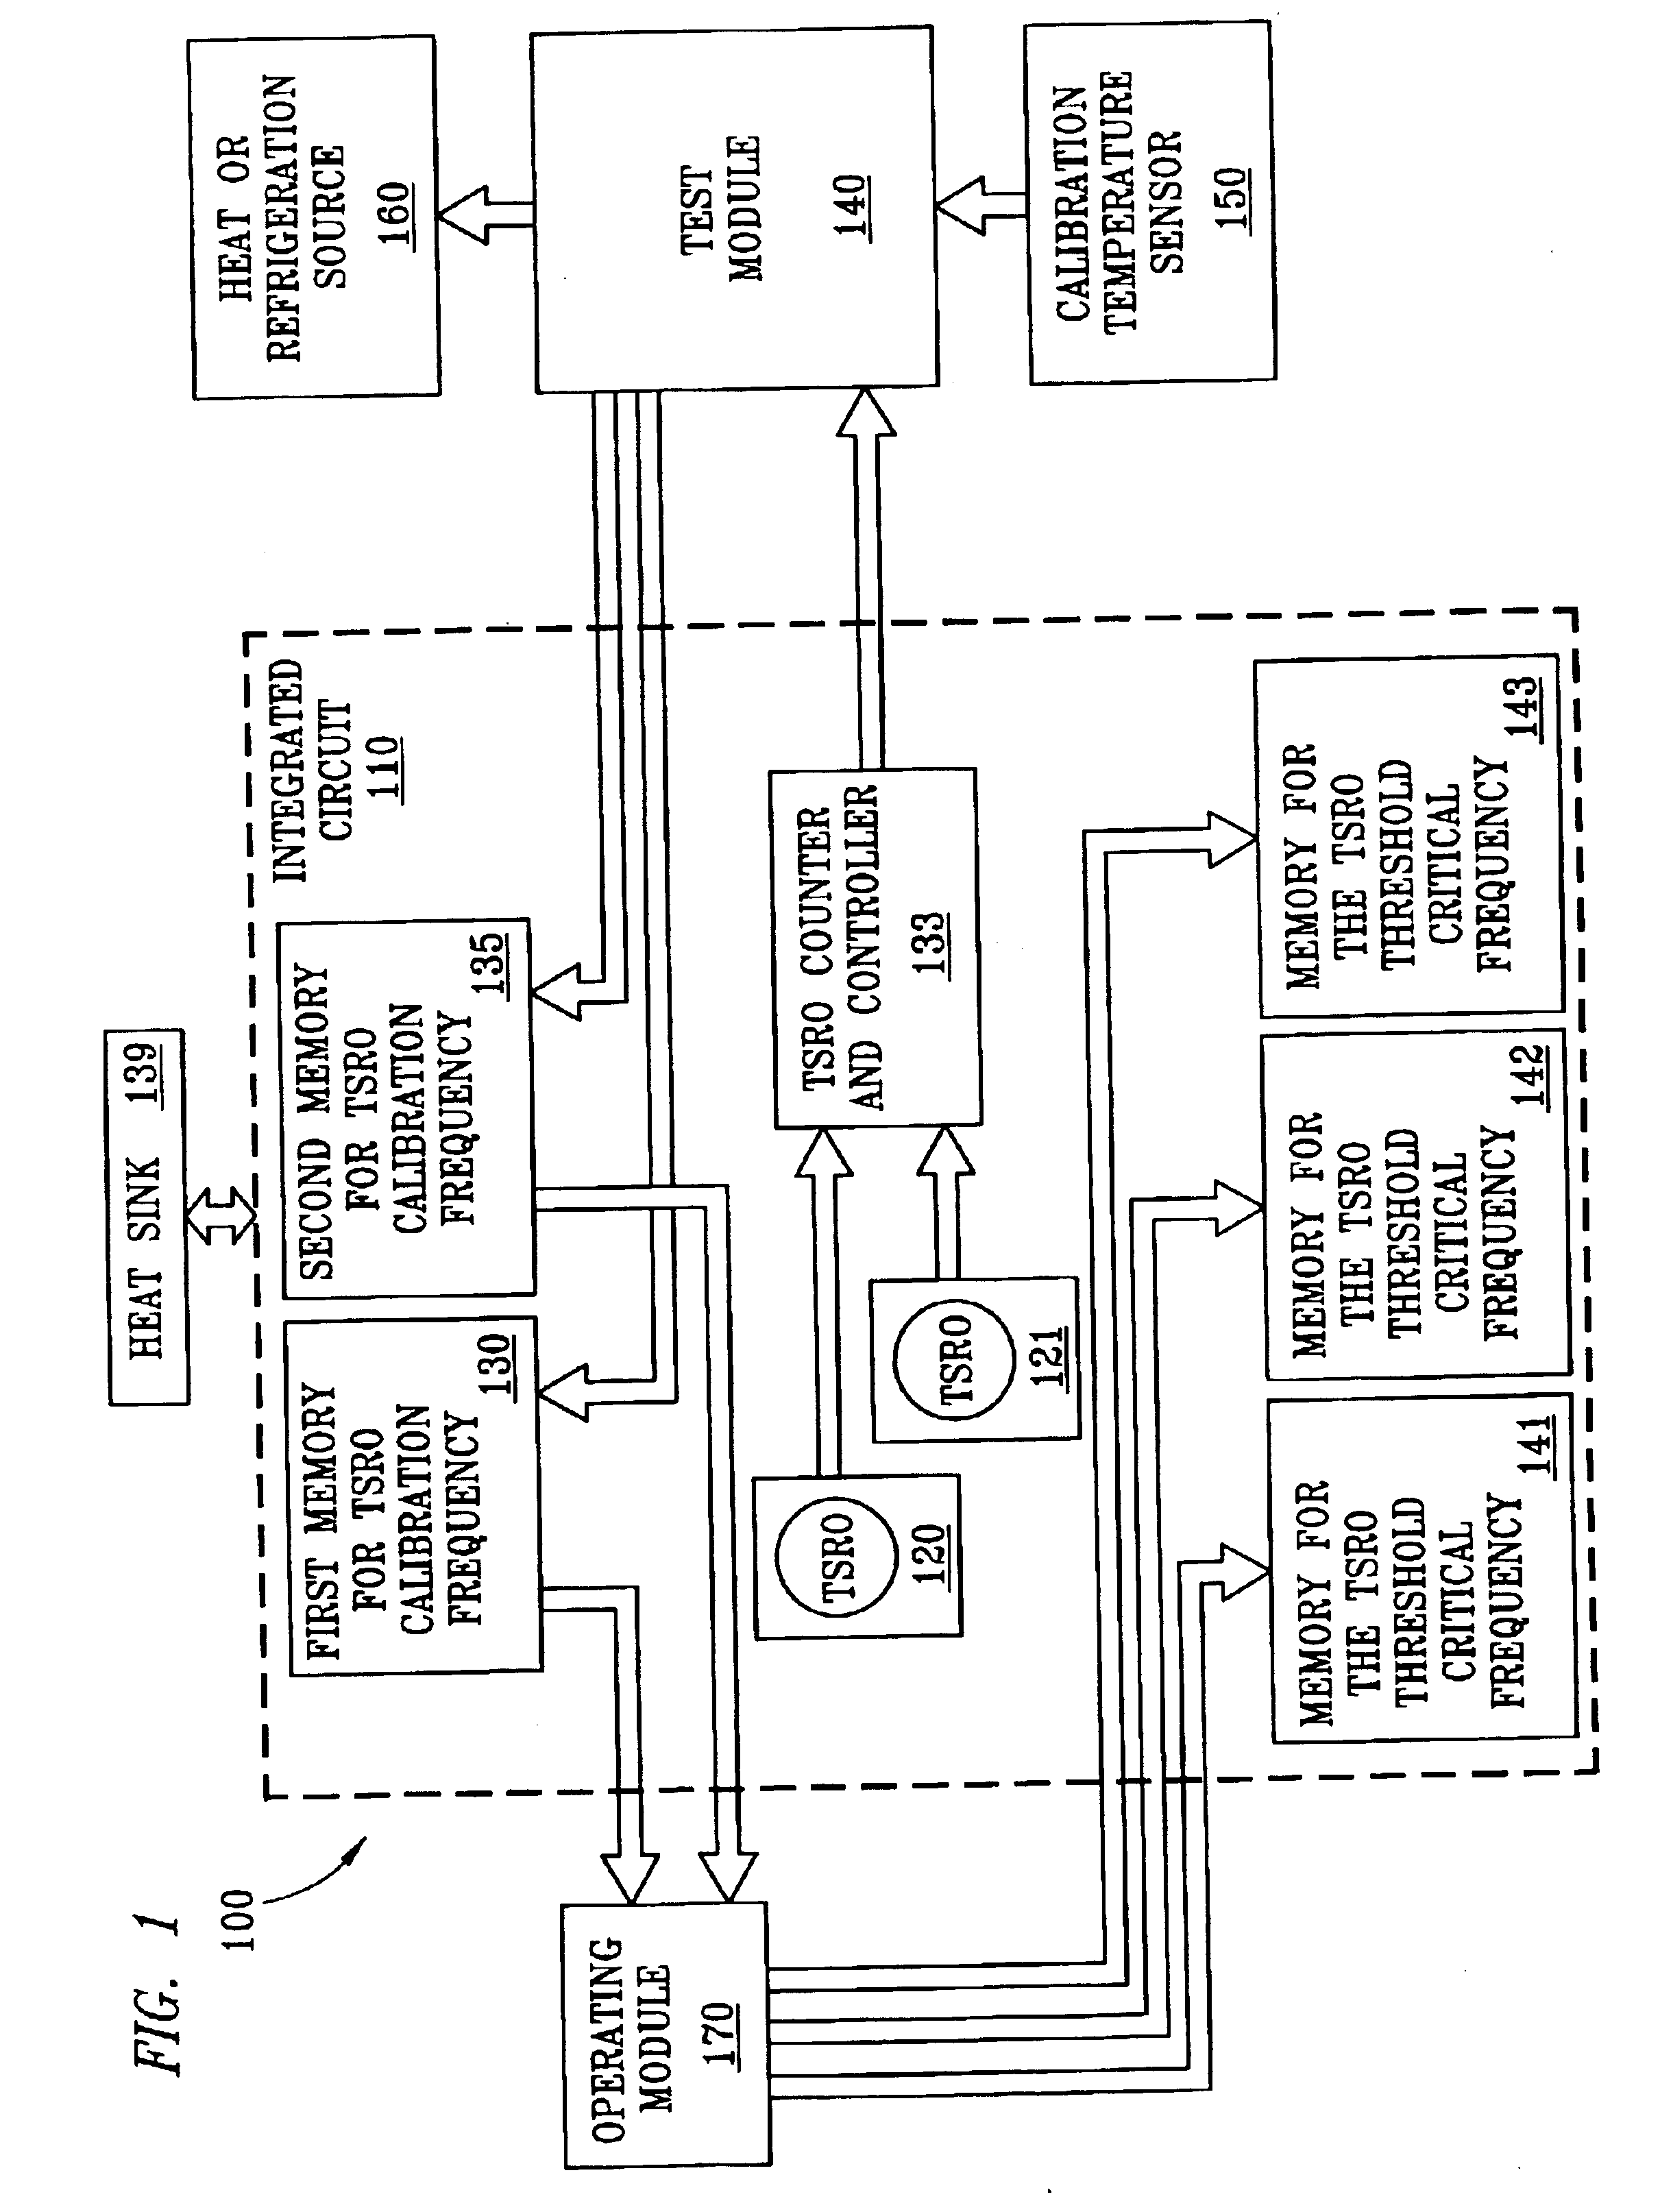 Method and apparatus to dynamically recalibrate VLSI chip thermal sensors through software control